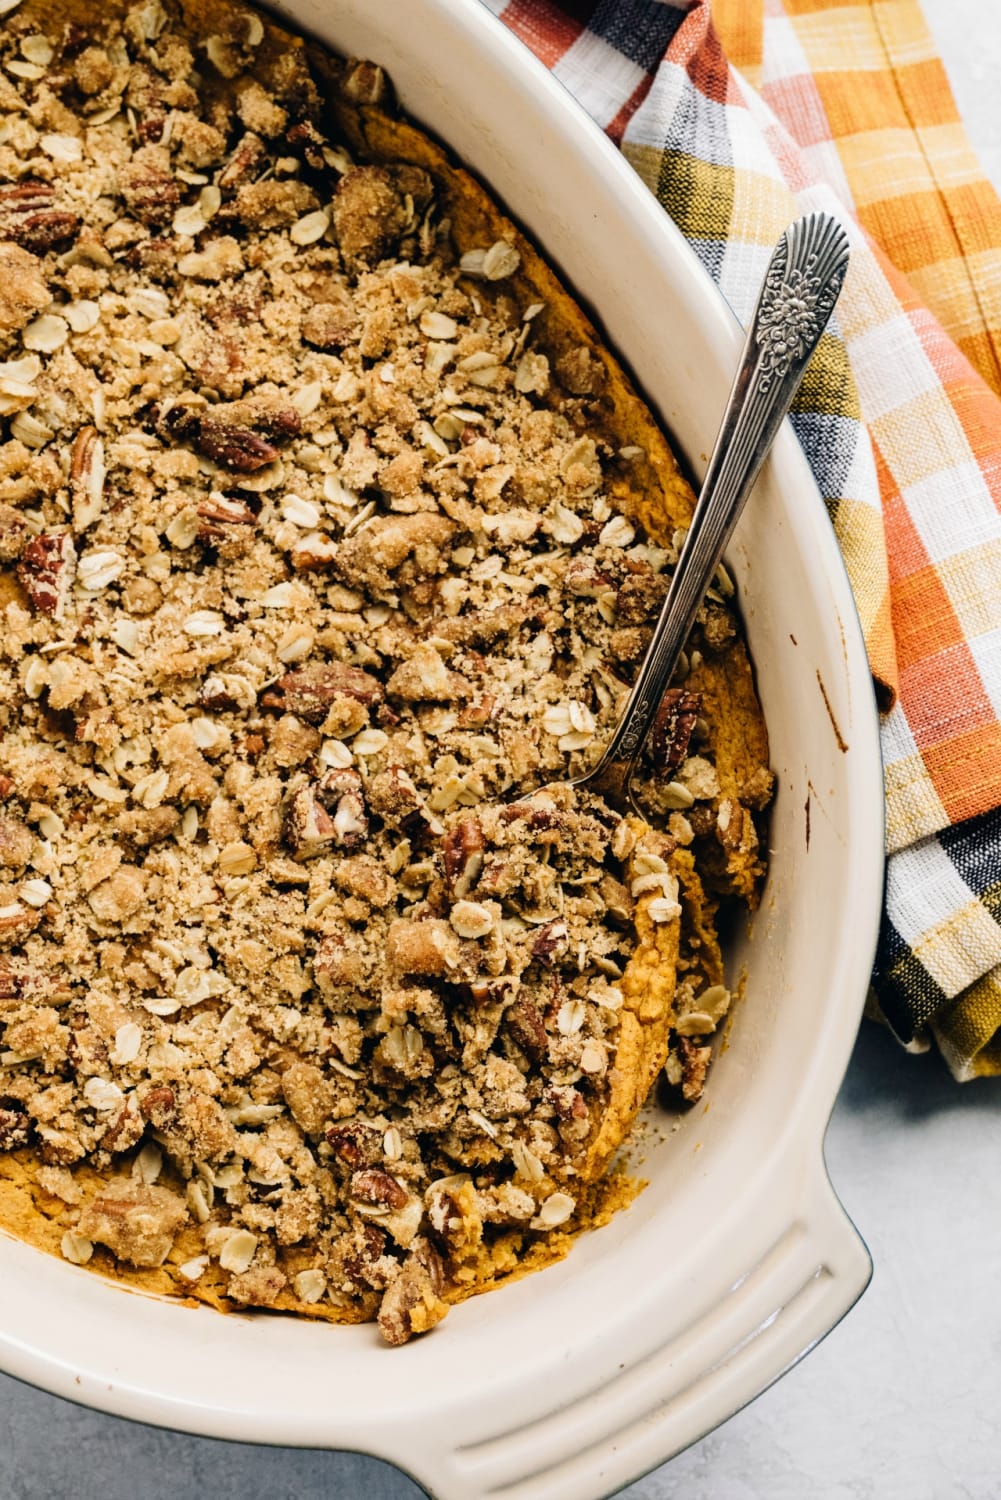 Easy sweet potato casserole. Perfect for the holidays!